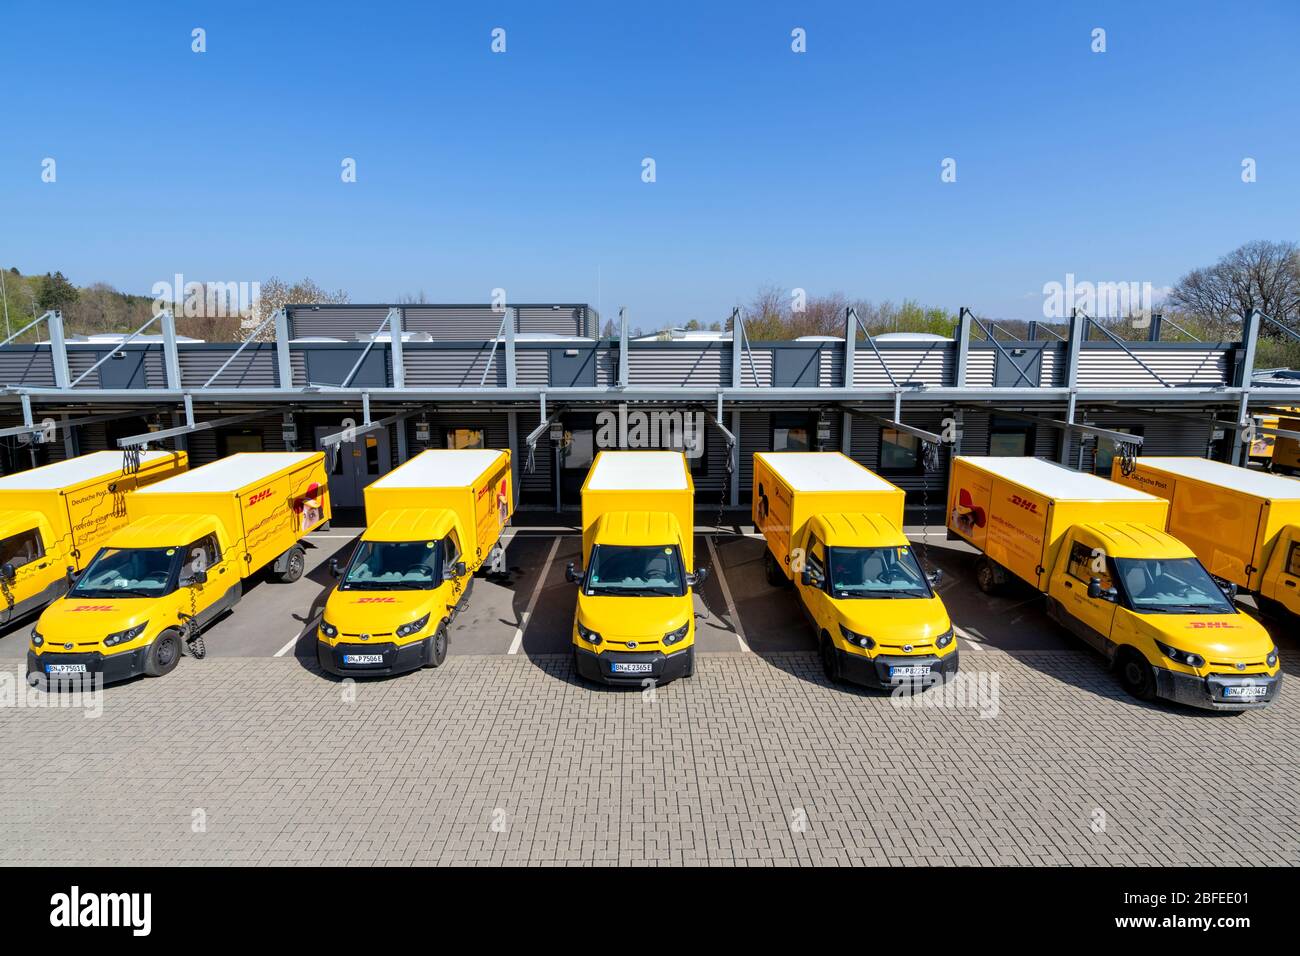 StreetScooter Work at Deutsche Post DHL depot. Stock Photo